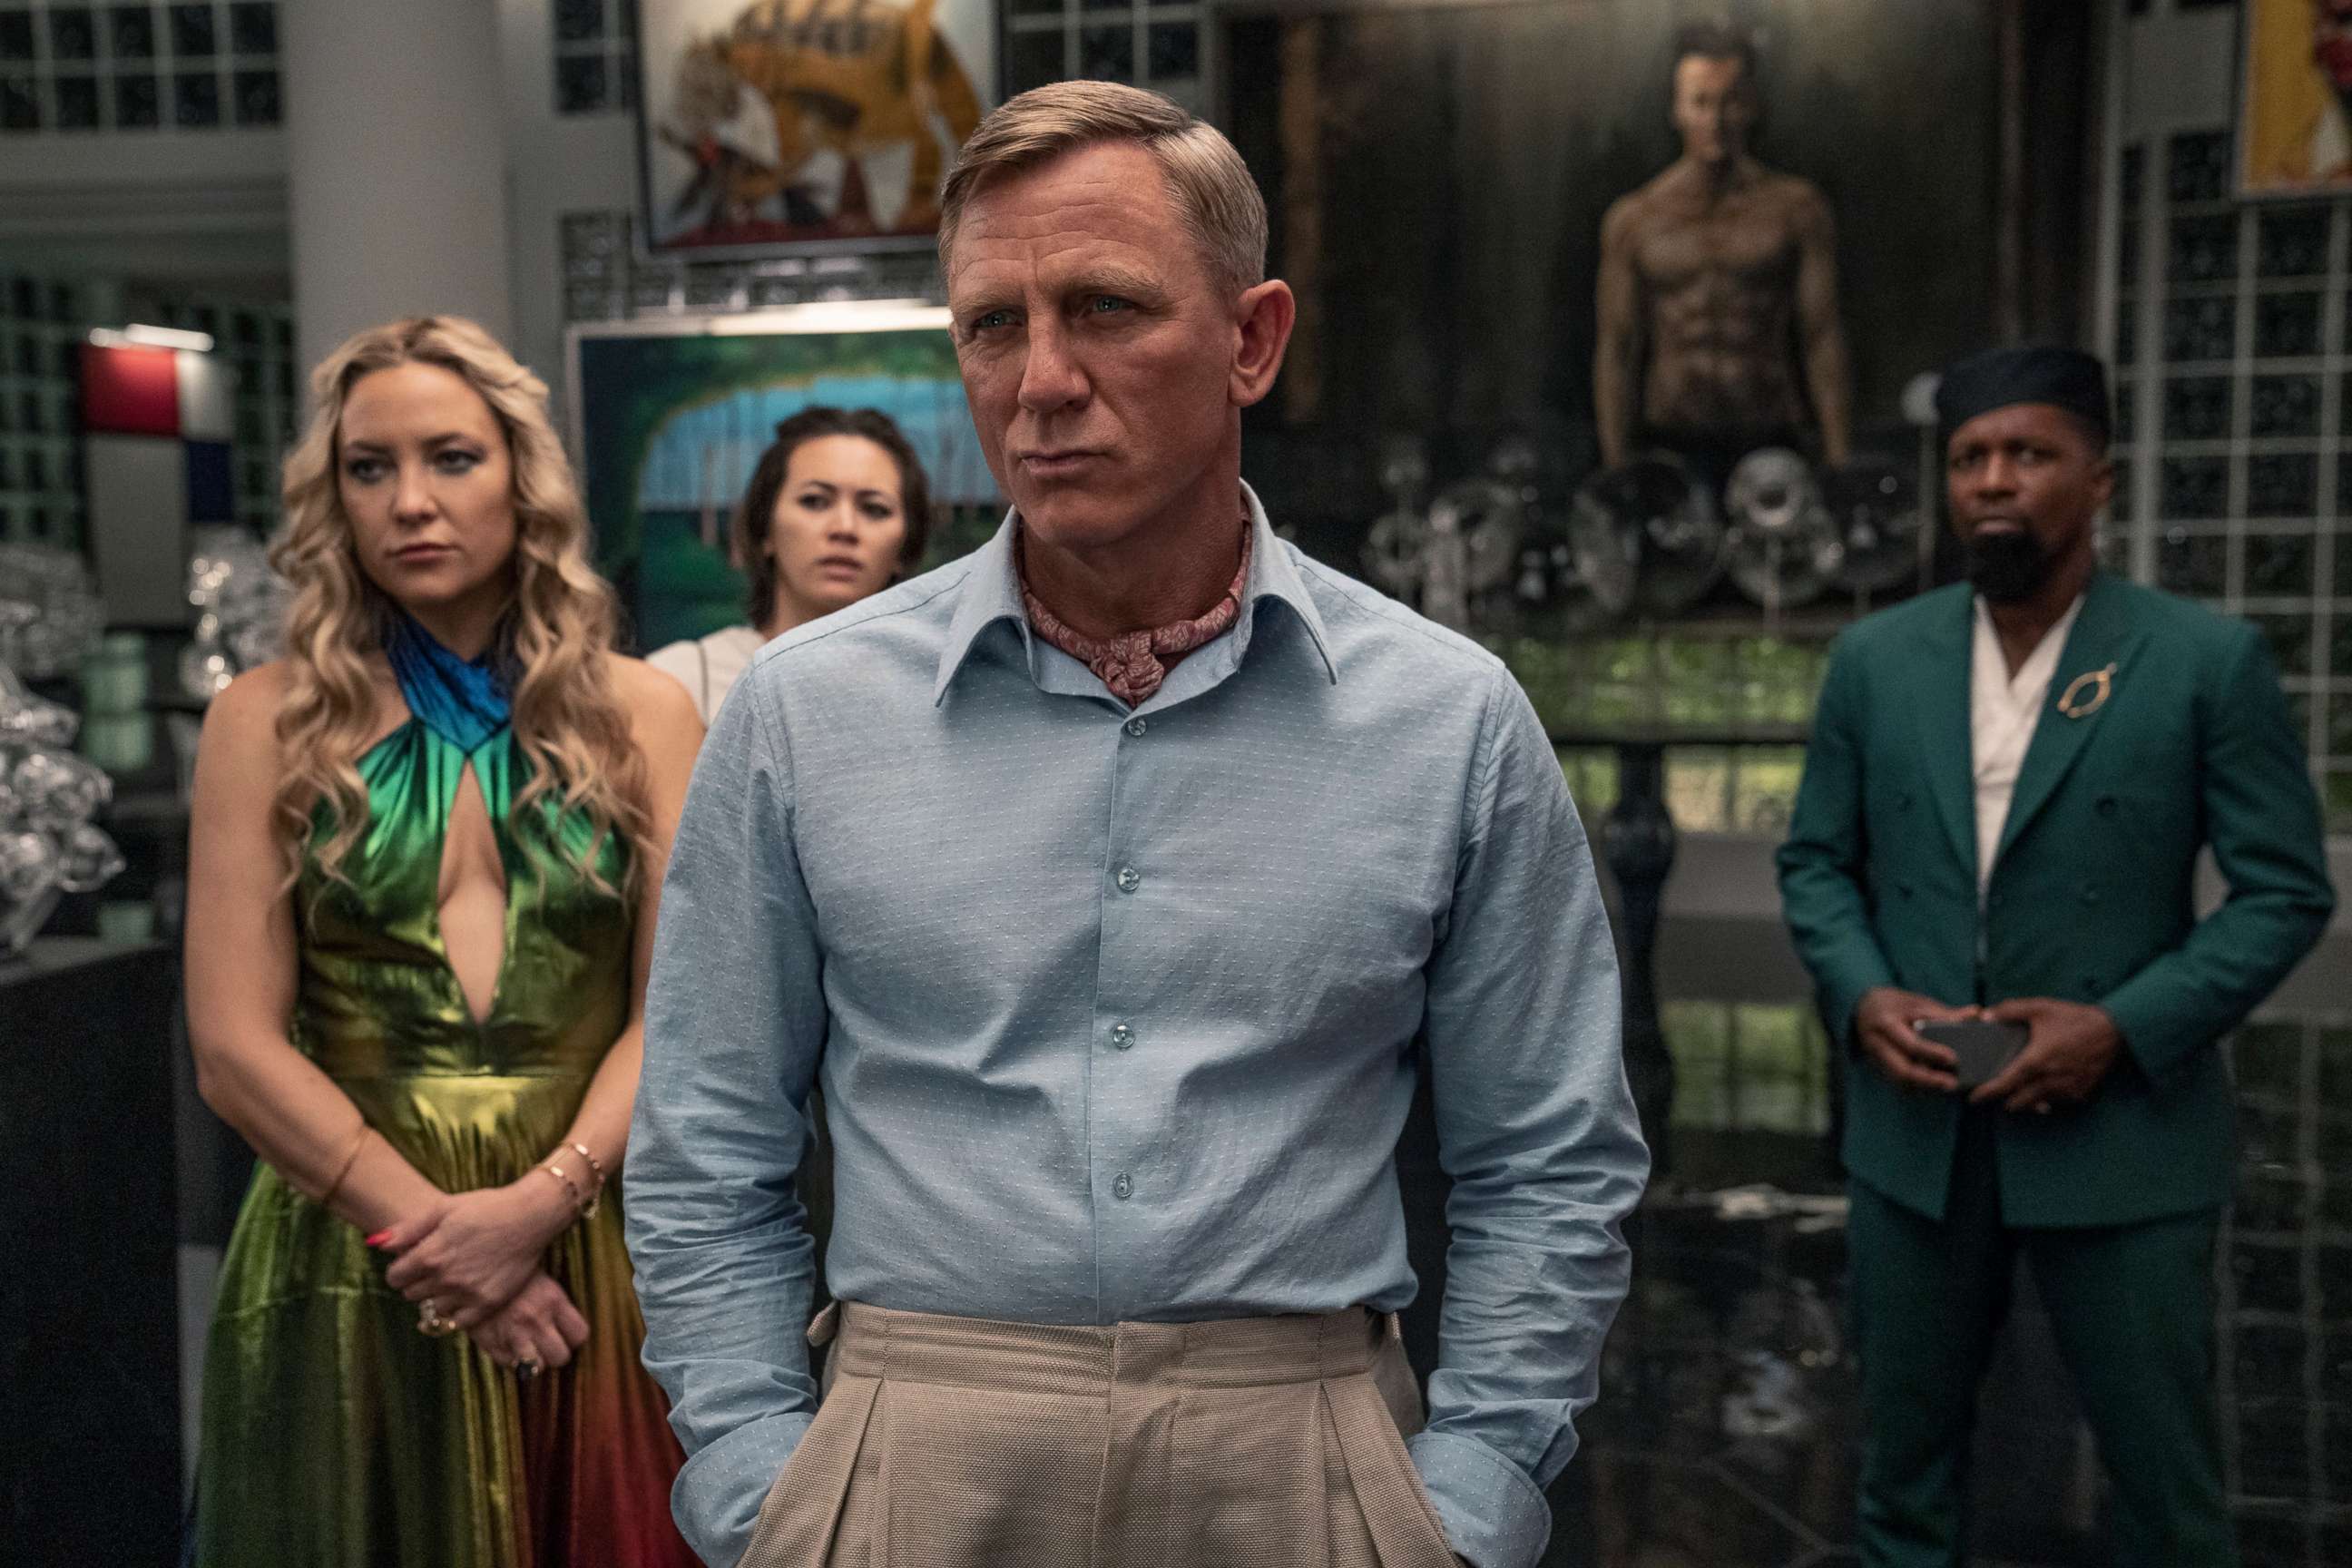 PHOTO: Kate Hudson as Birdie, Jessica Henwick as Peg, Daniel Craig as Detective Benoit Blanc, and Leslie Odom Jr. as Lionel in "Glass Onion: A Knives Out Mystery," 2022.